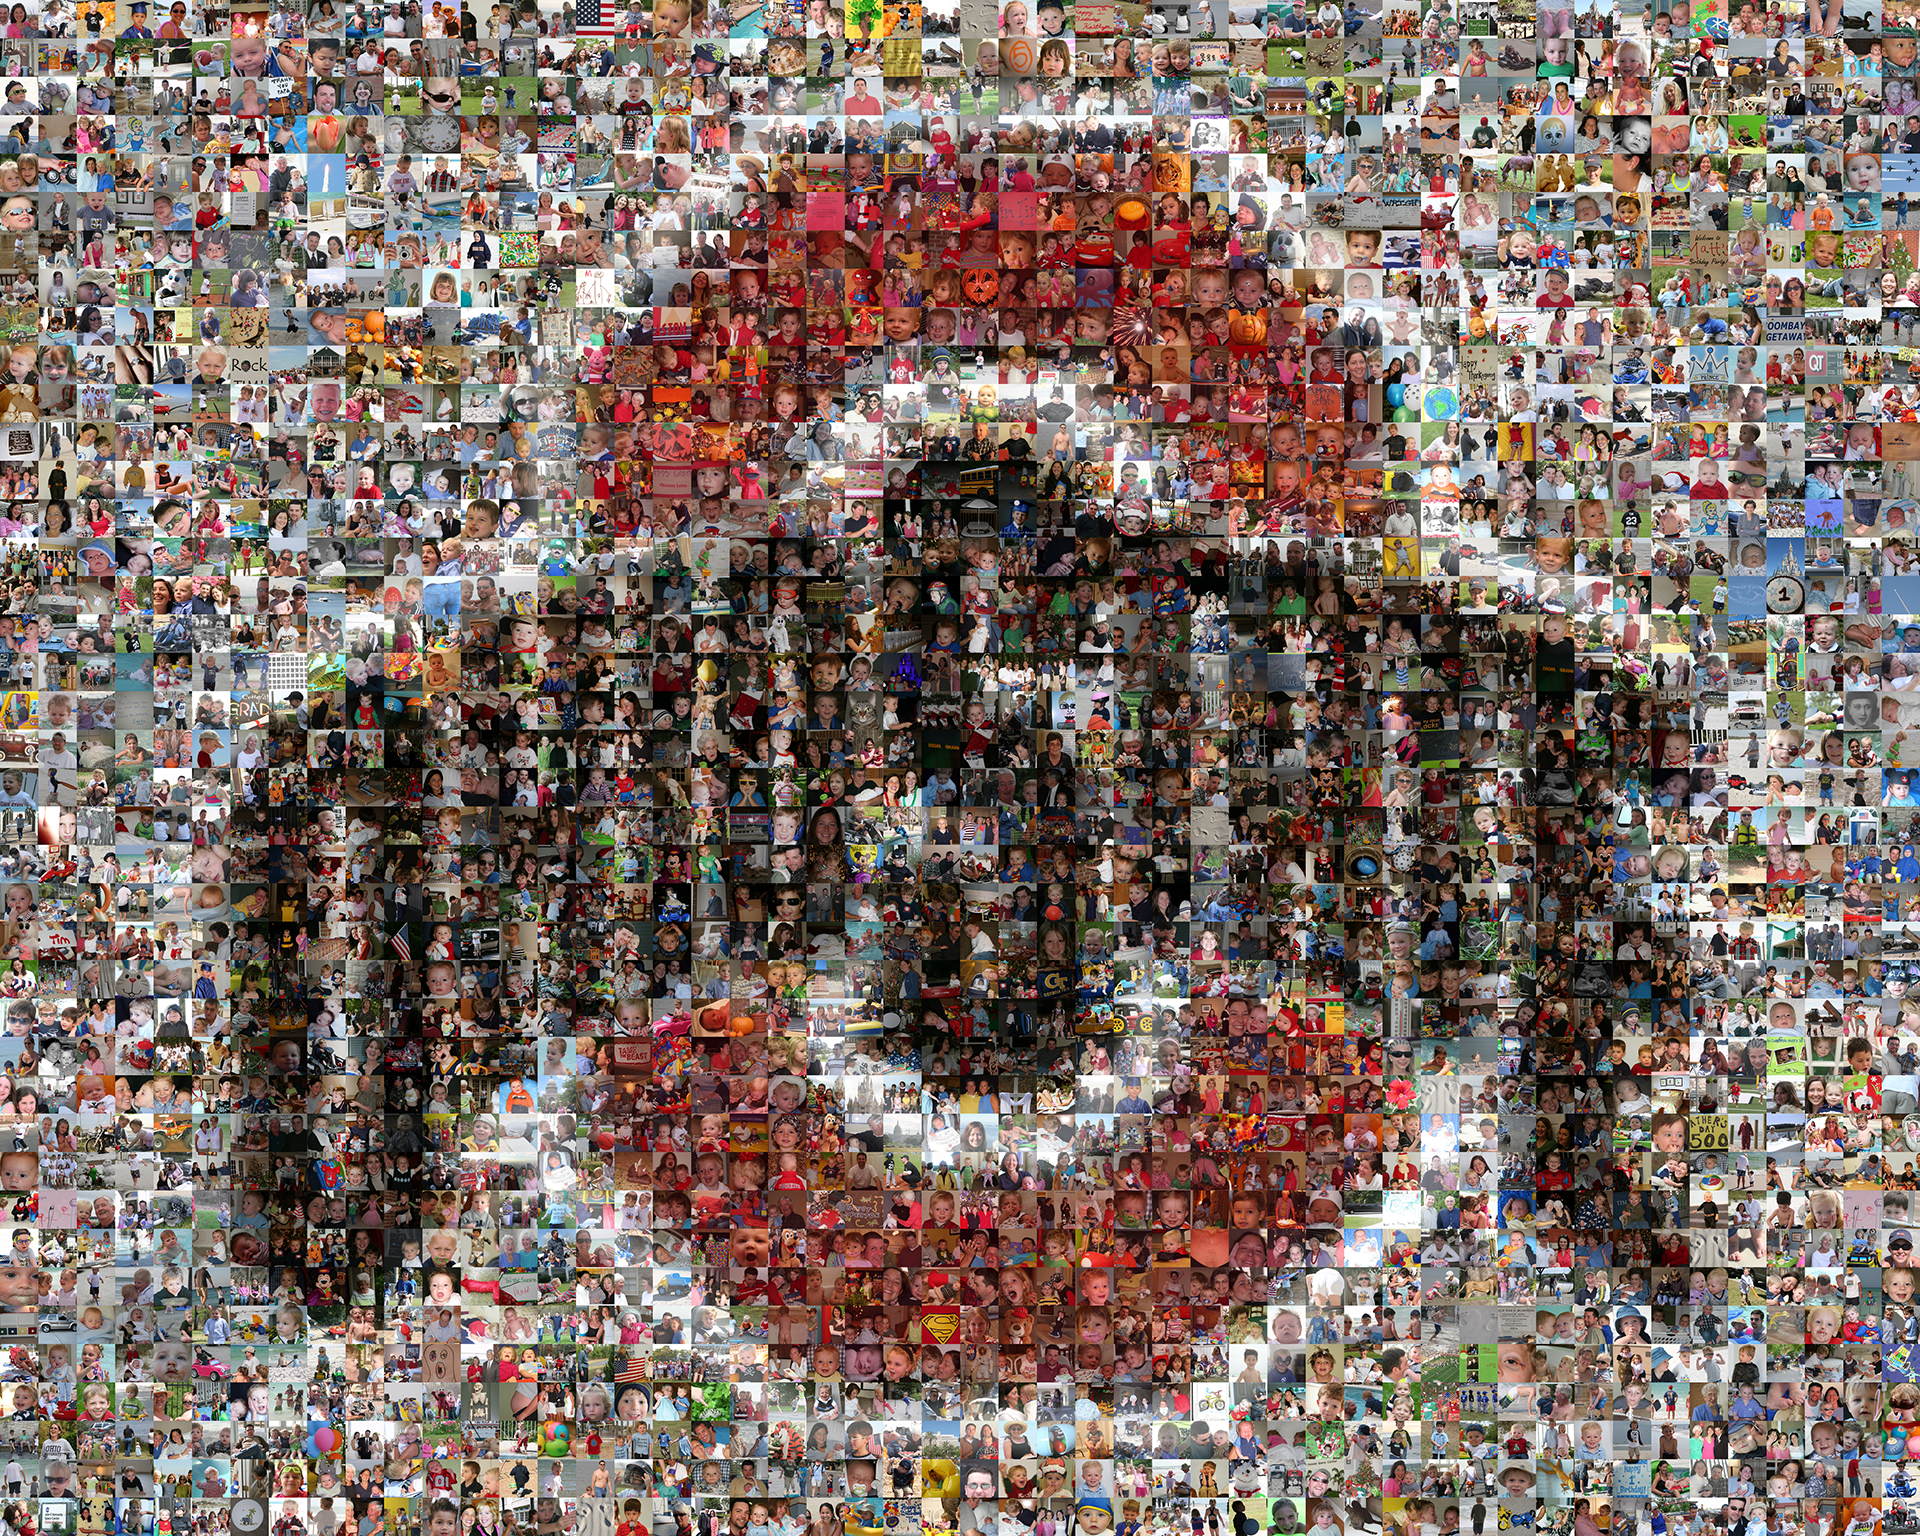 photo mosaic created using over 2,500 user submitted photos